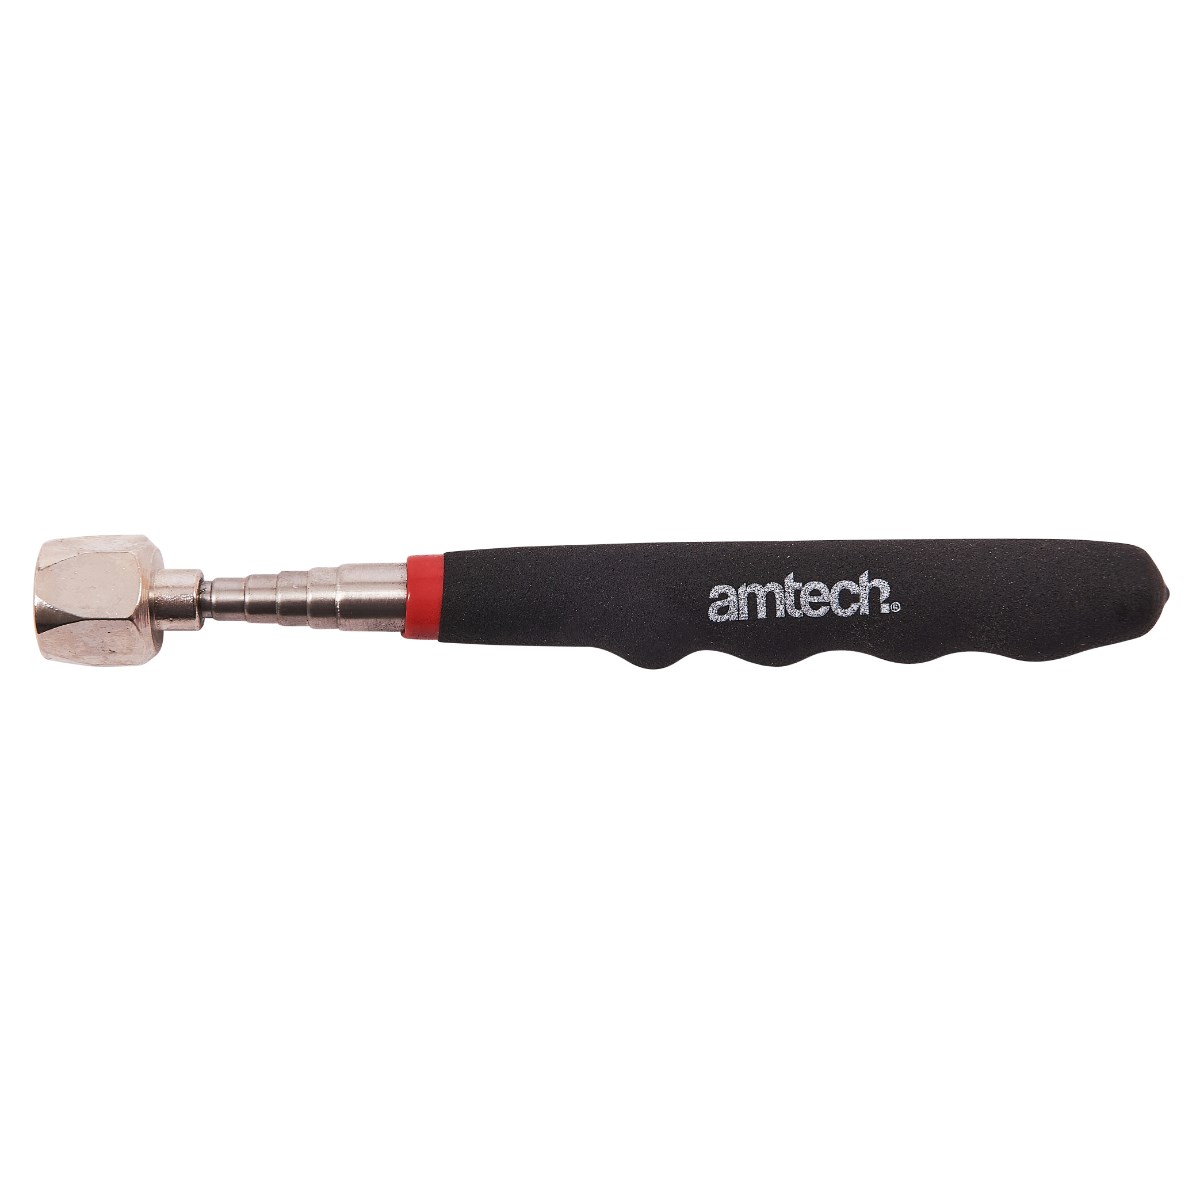 Telescopic Magnetic Pick up Tool 16lb Long Reach Amtech S2200 for sale online 